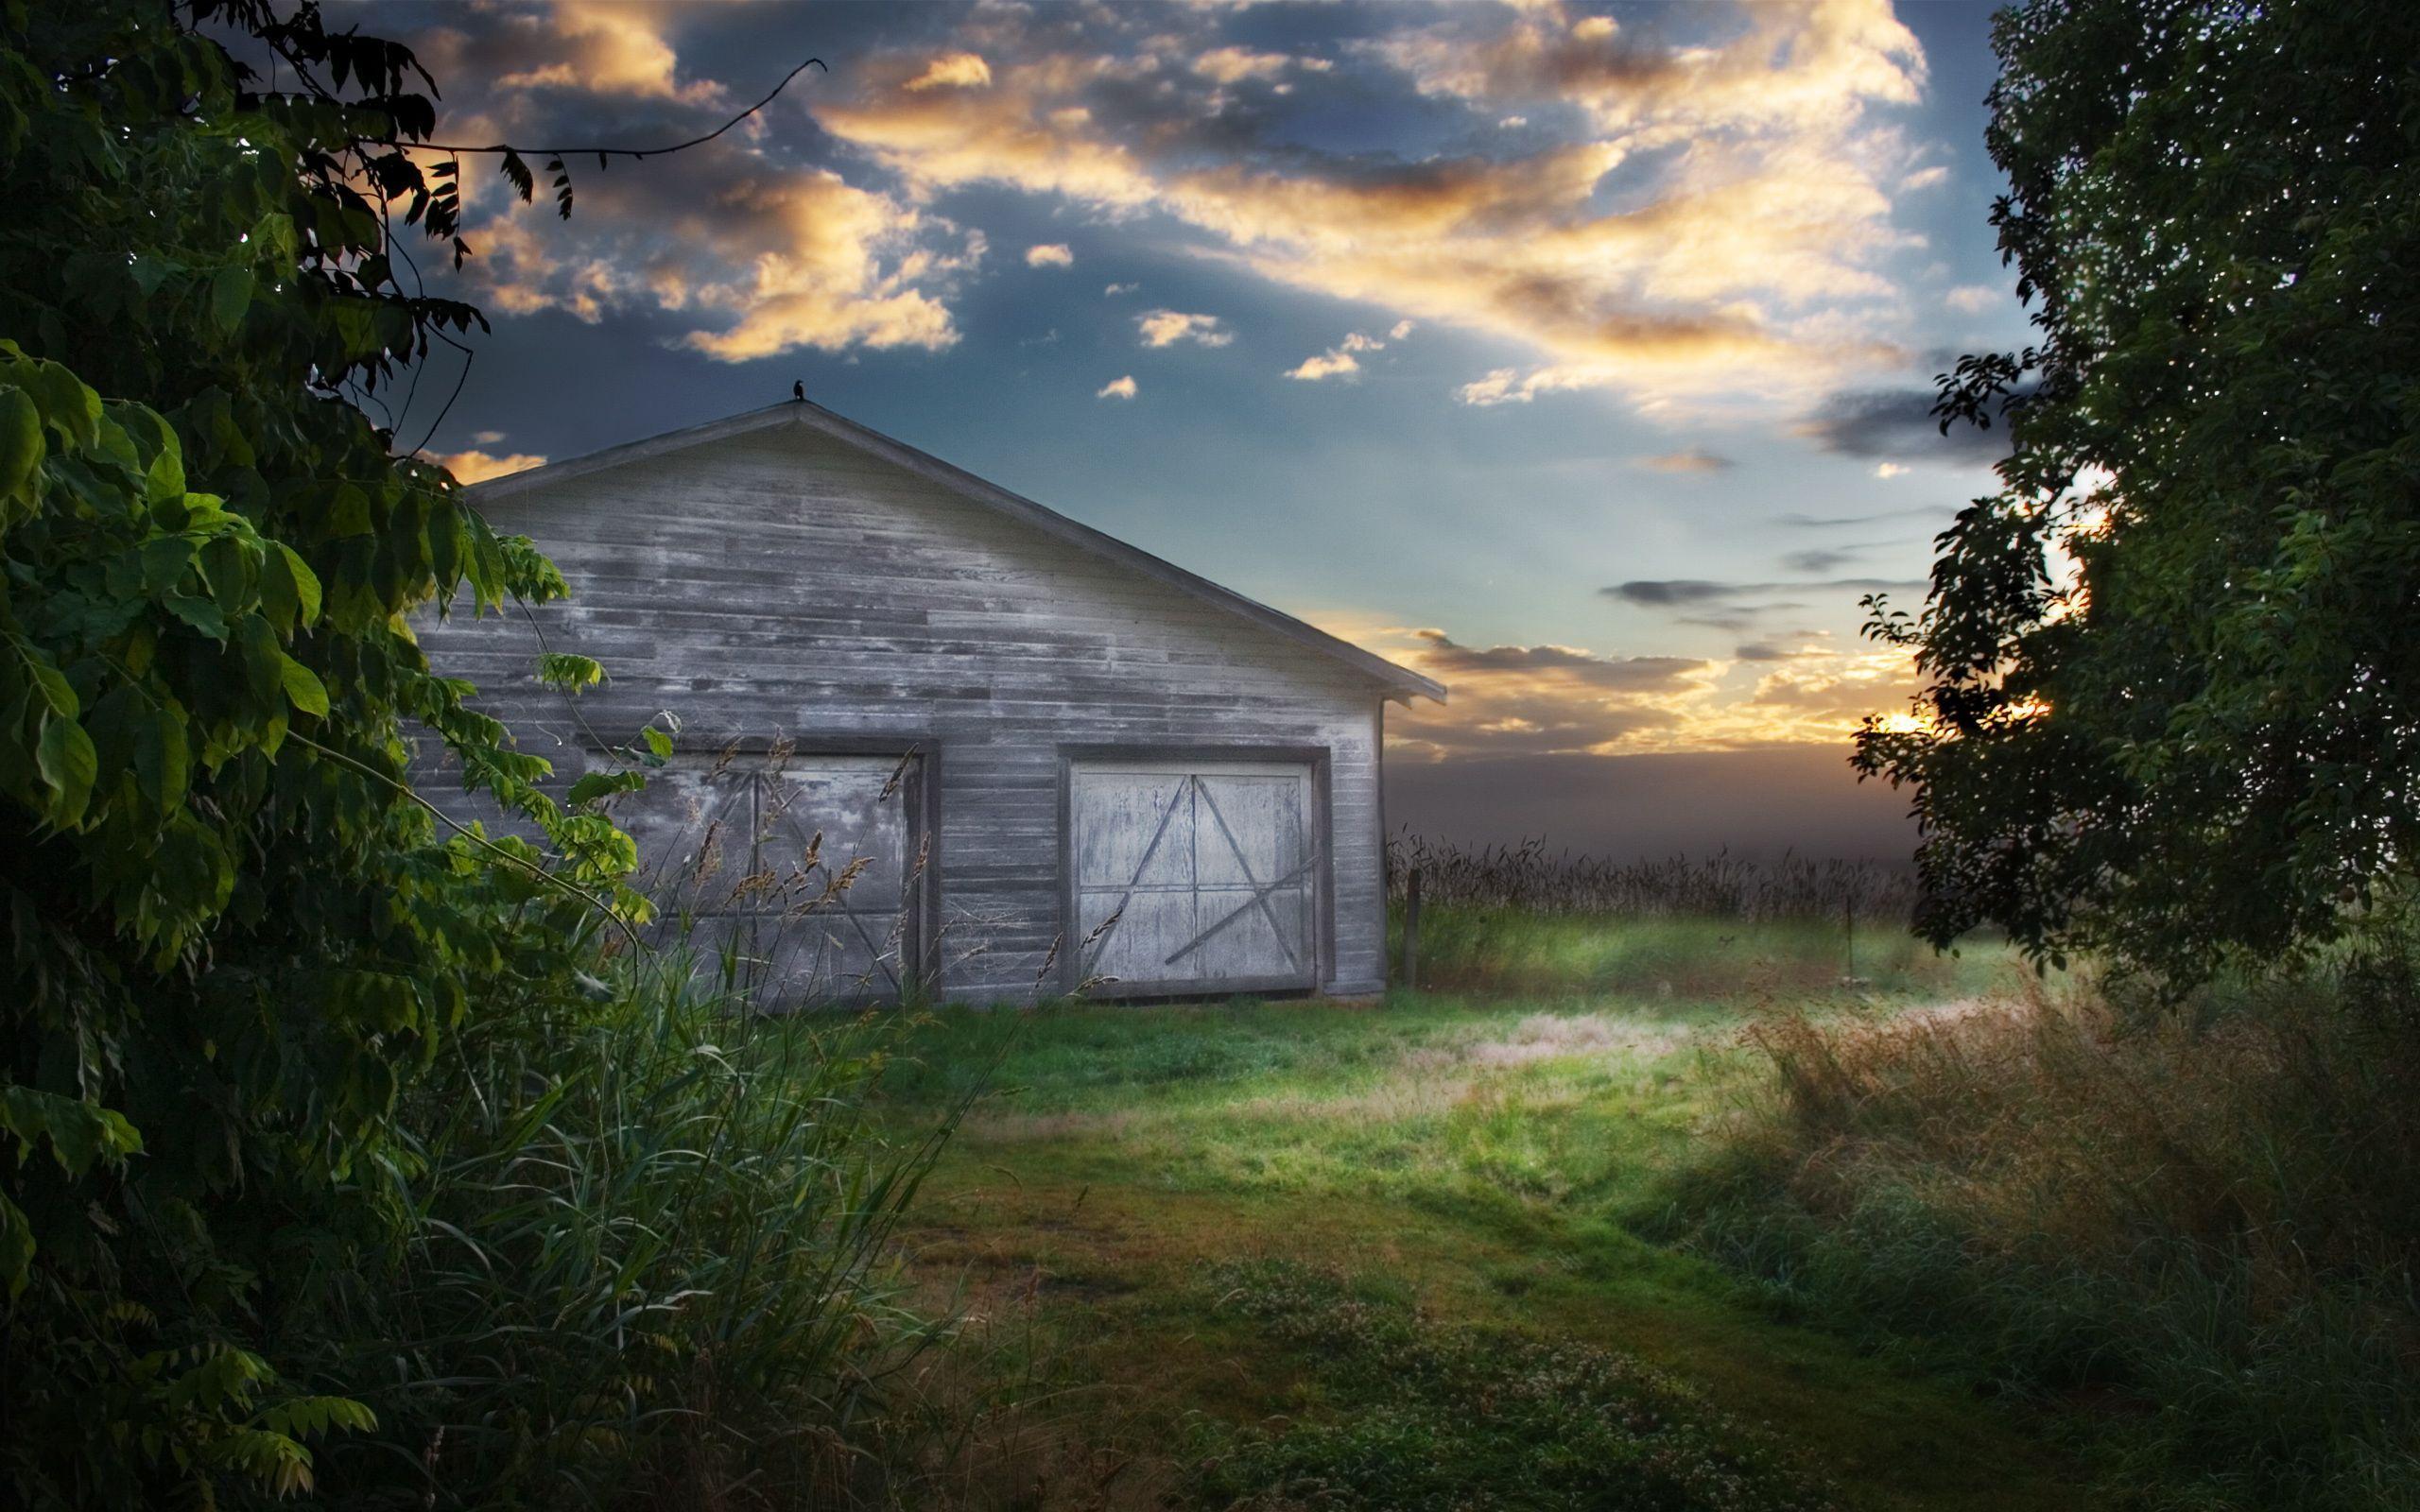 Old house with Garage. Free Desktop Wallpaper for Widescreen, HD